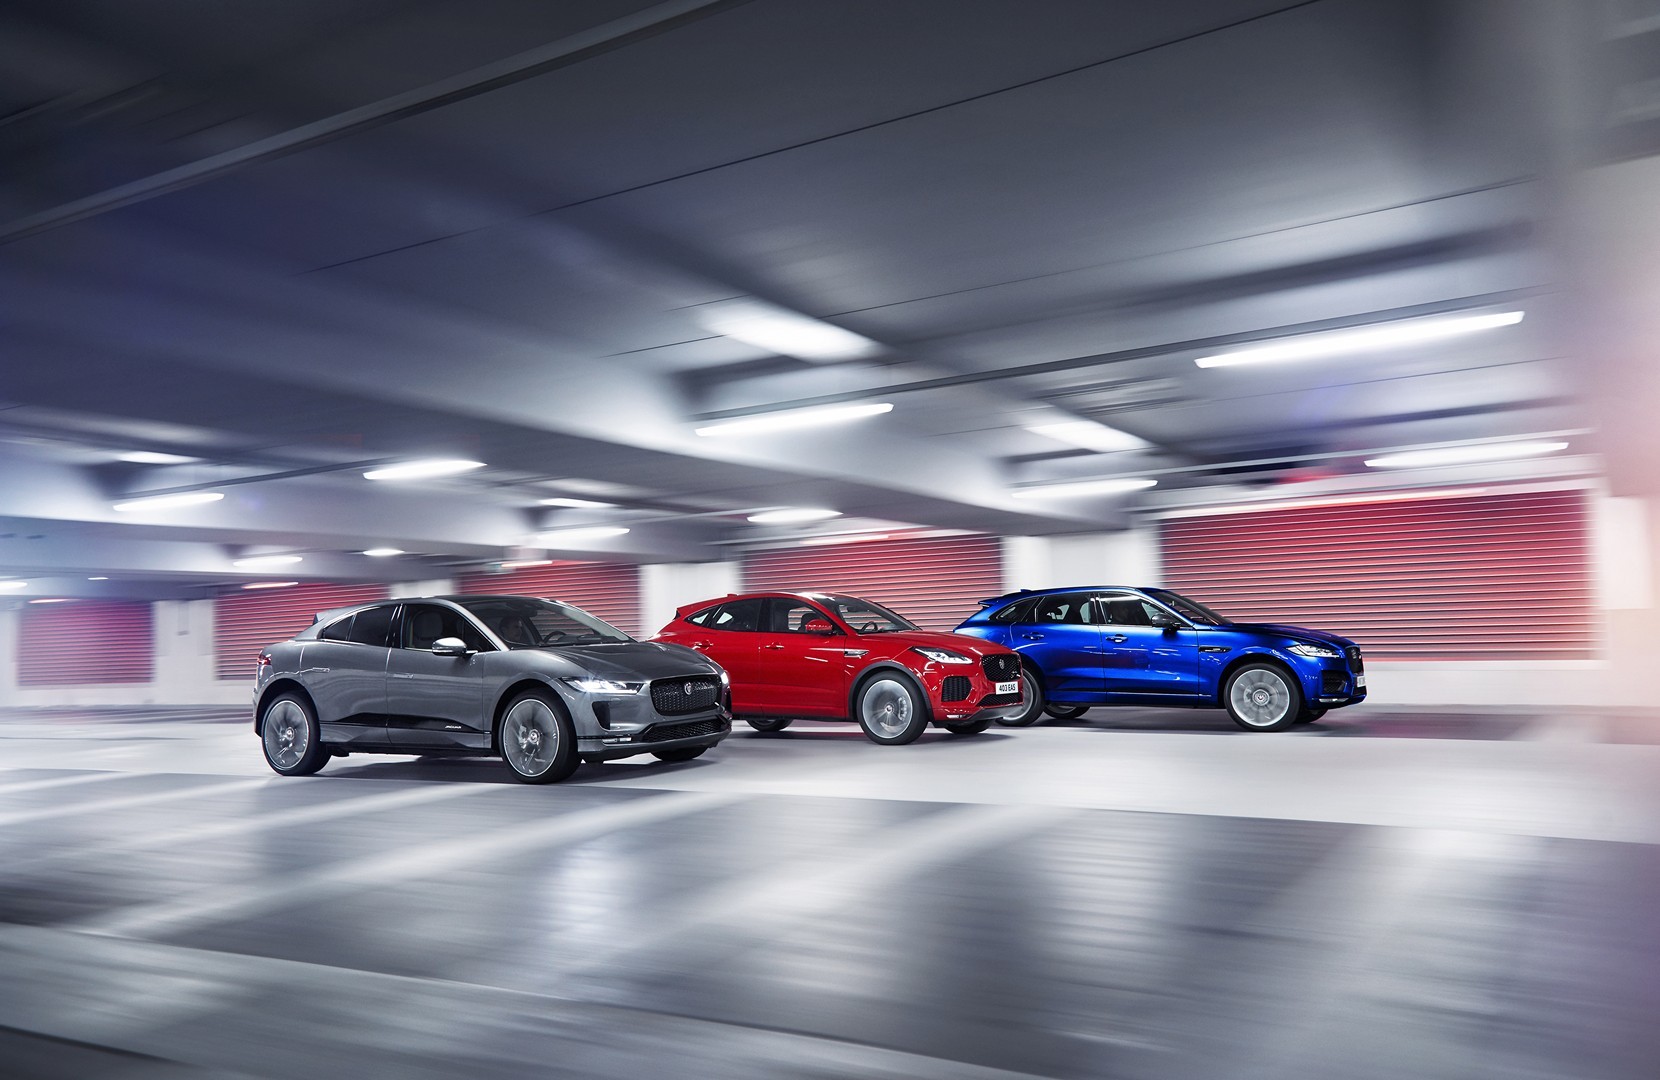 https://s1.cdn.autoevolution.com/images/news/gallery/2020-jaguar-i-pace-update-offers-234-miles-of-range-thanks-to-etrophy-know-how_30.jpg